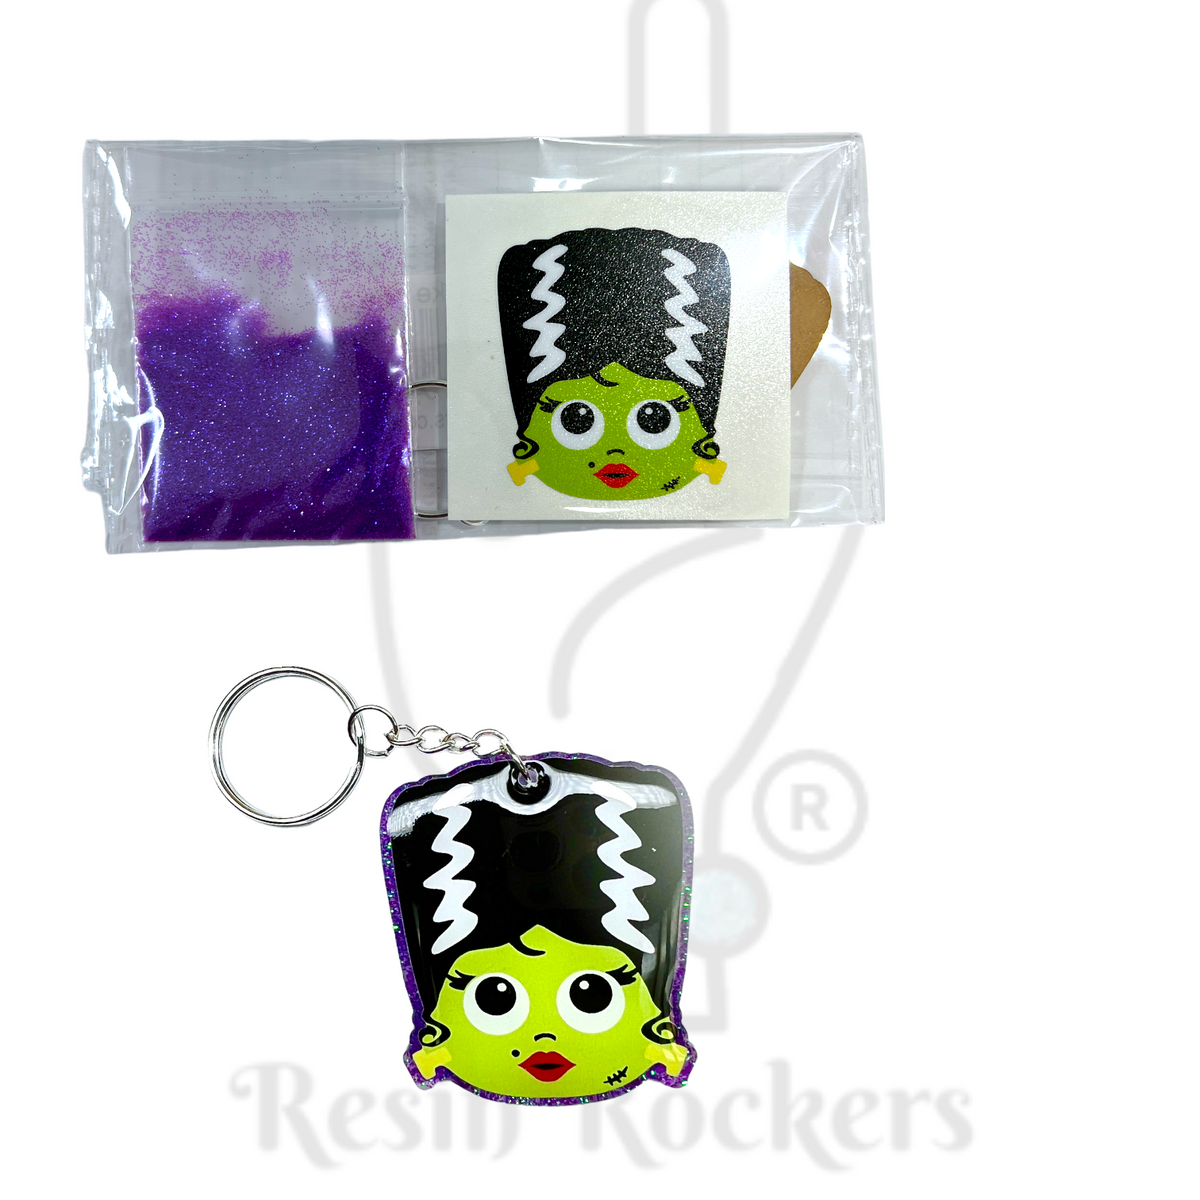 Bride of Frankenstein Acrylic Blank With Decal Keychain Kit